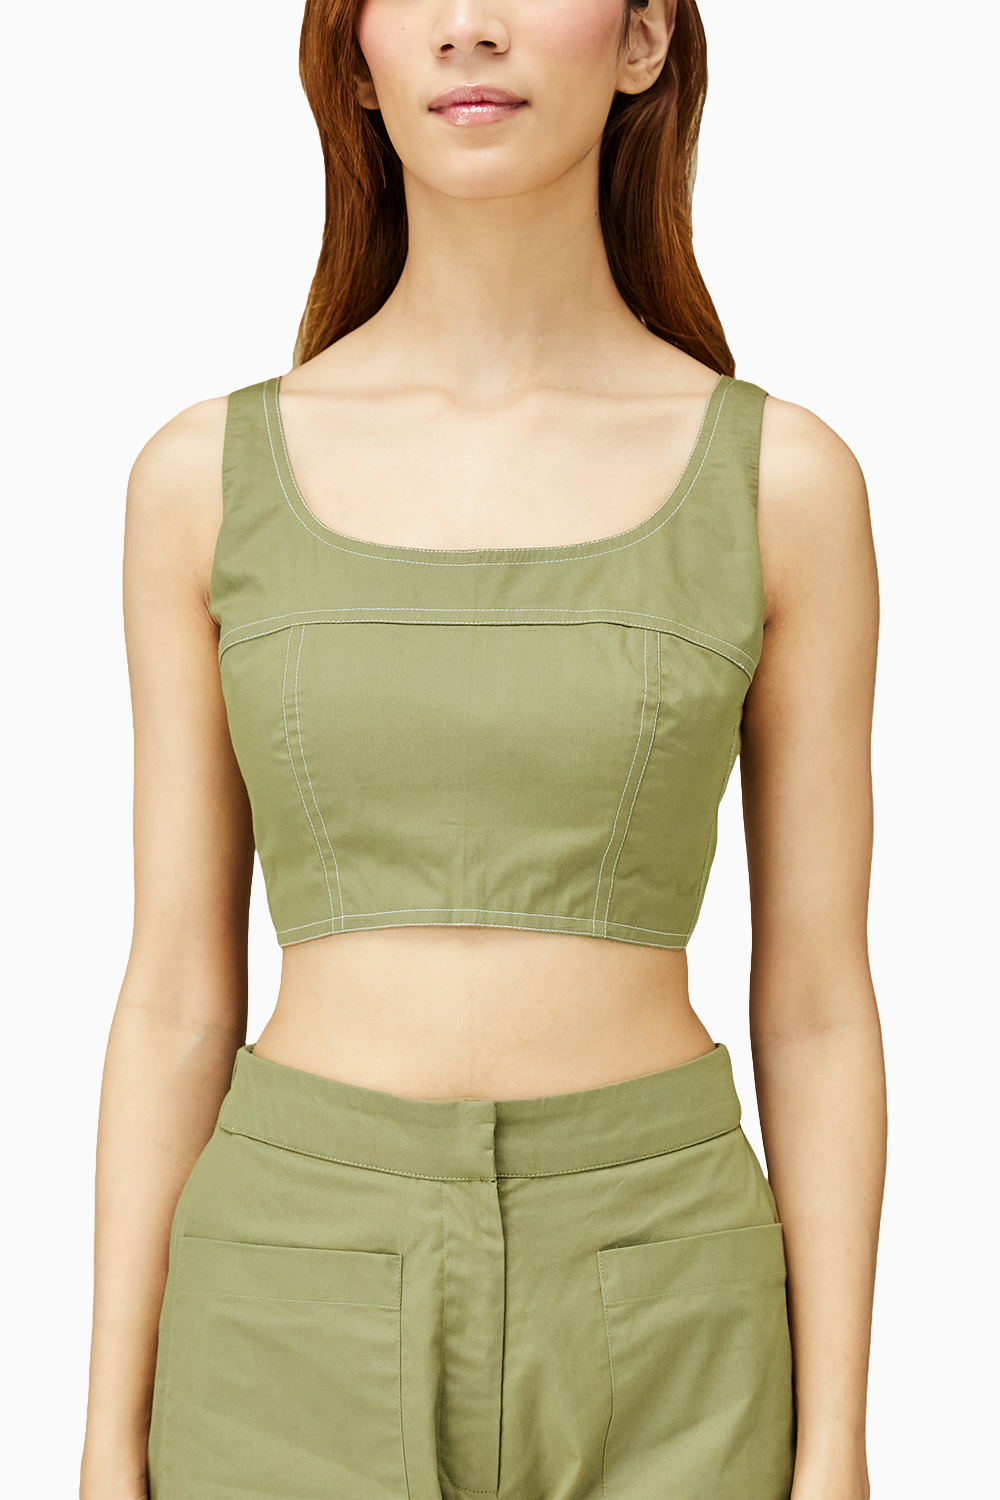 Khaki Green Bustier and Pants